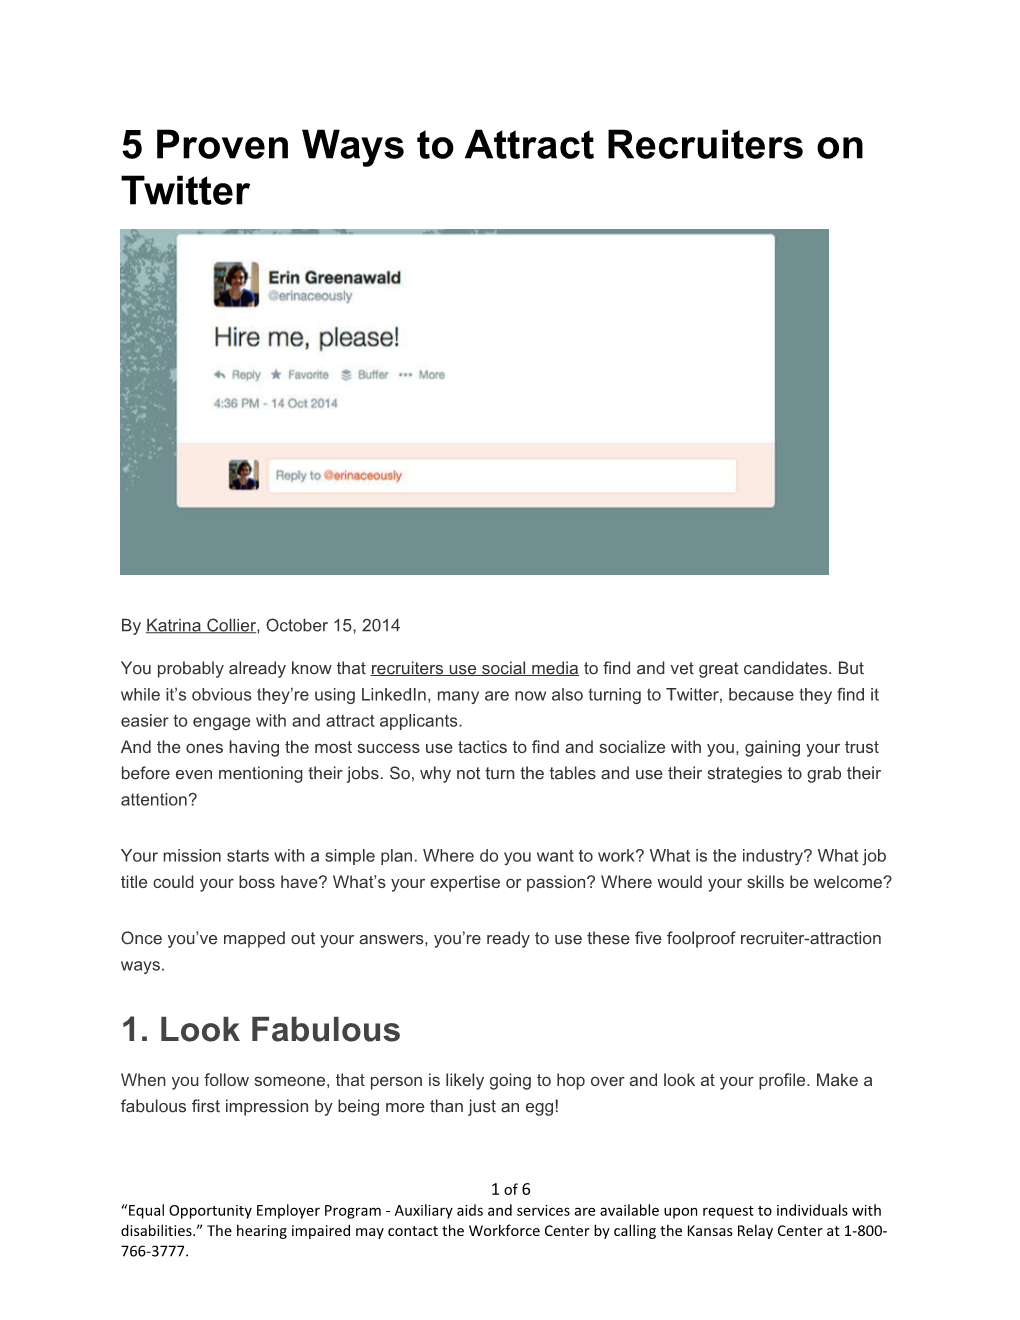 5 Proven Ways to Attract Recruiters on Twitter